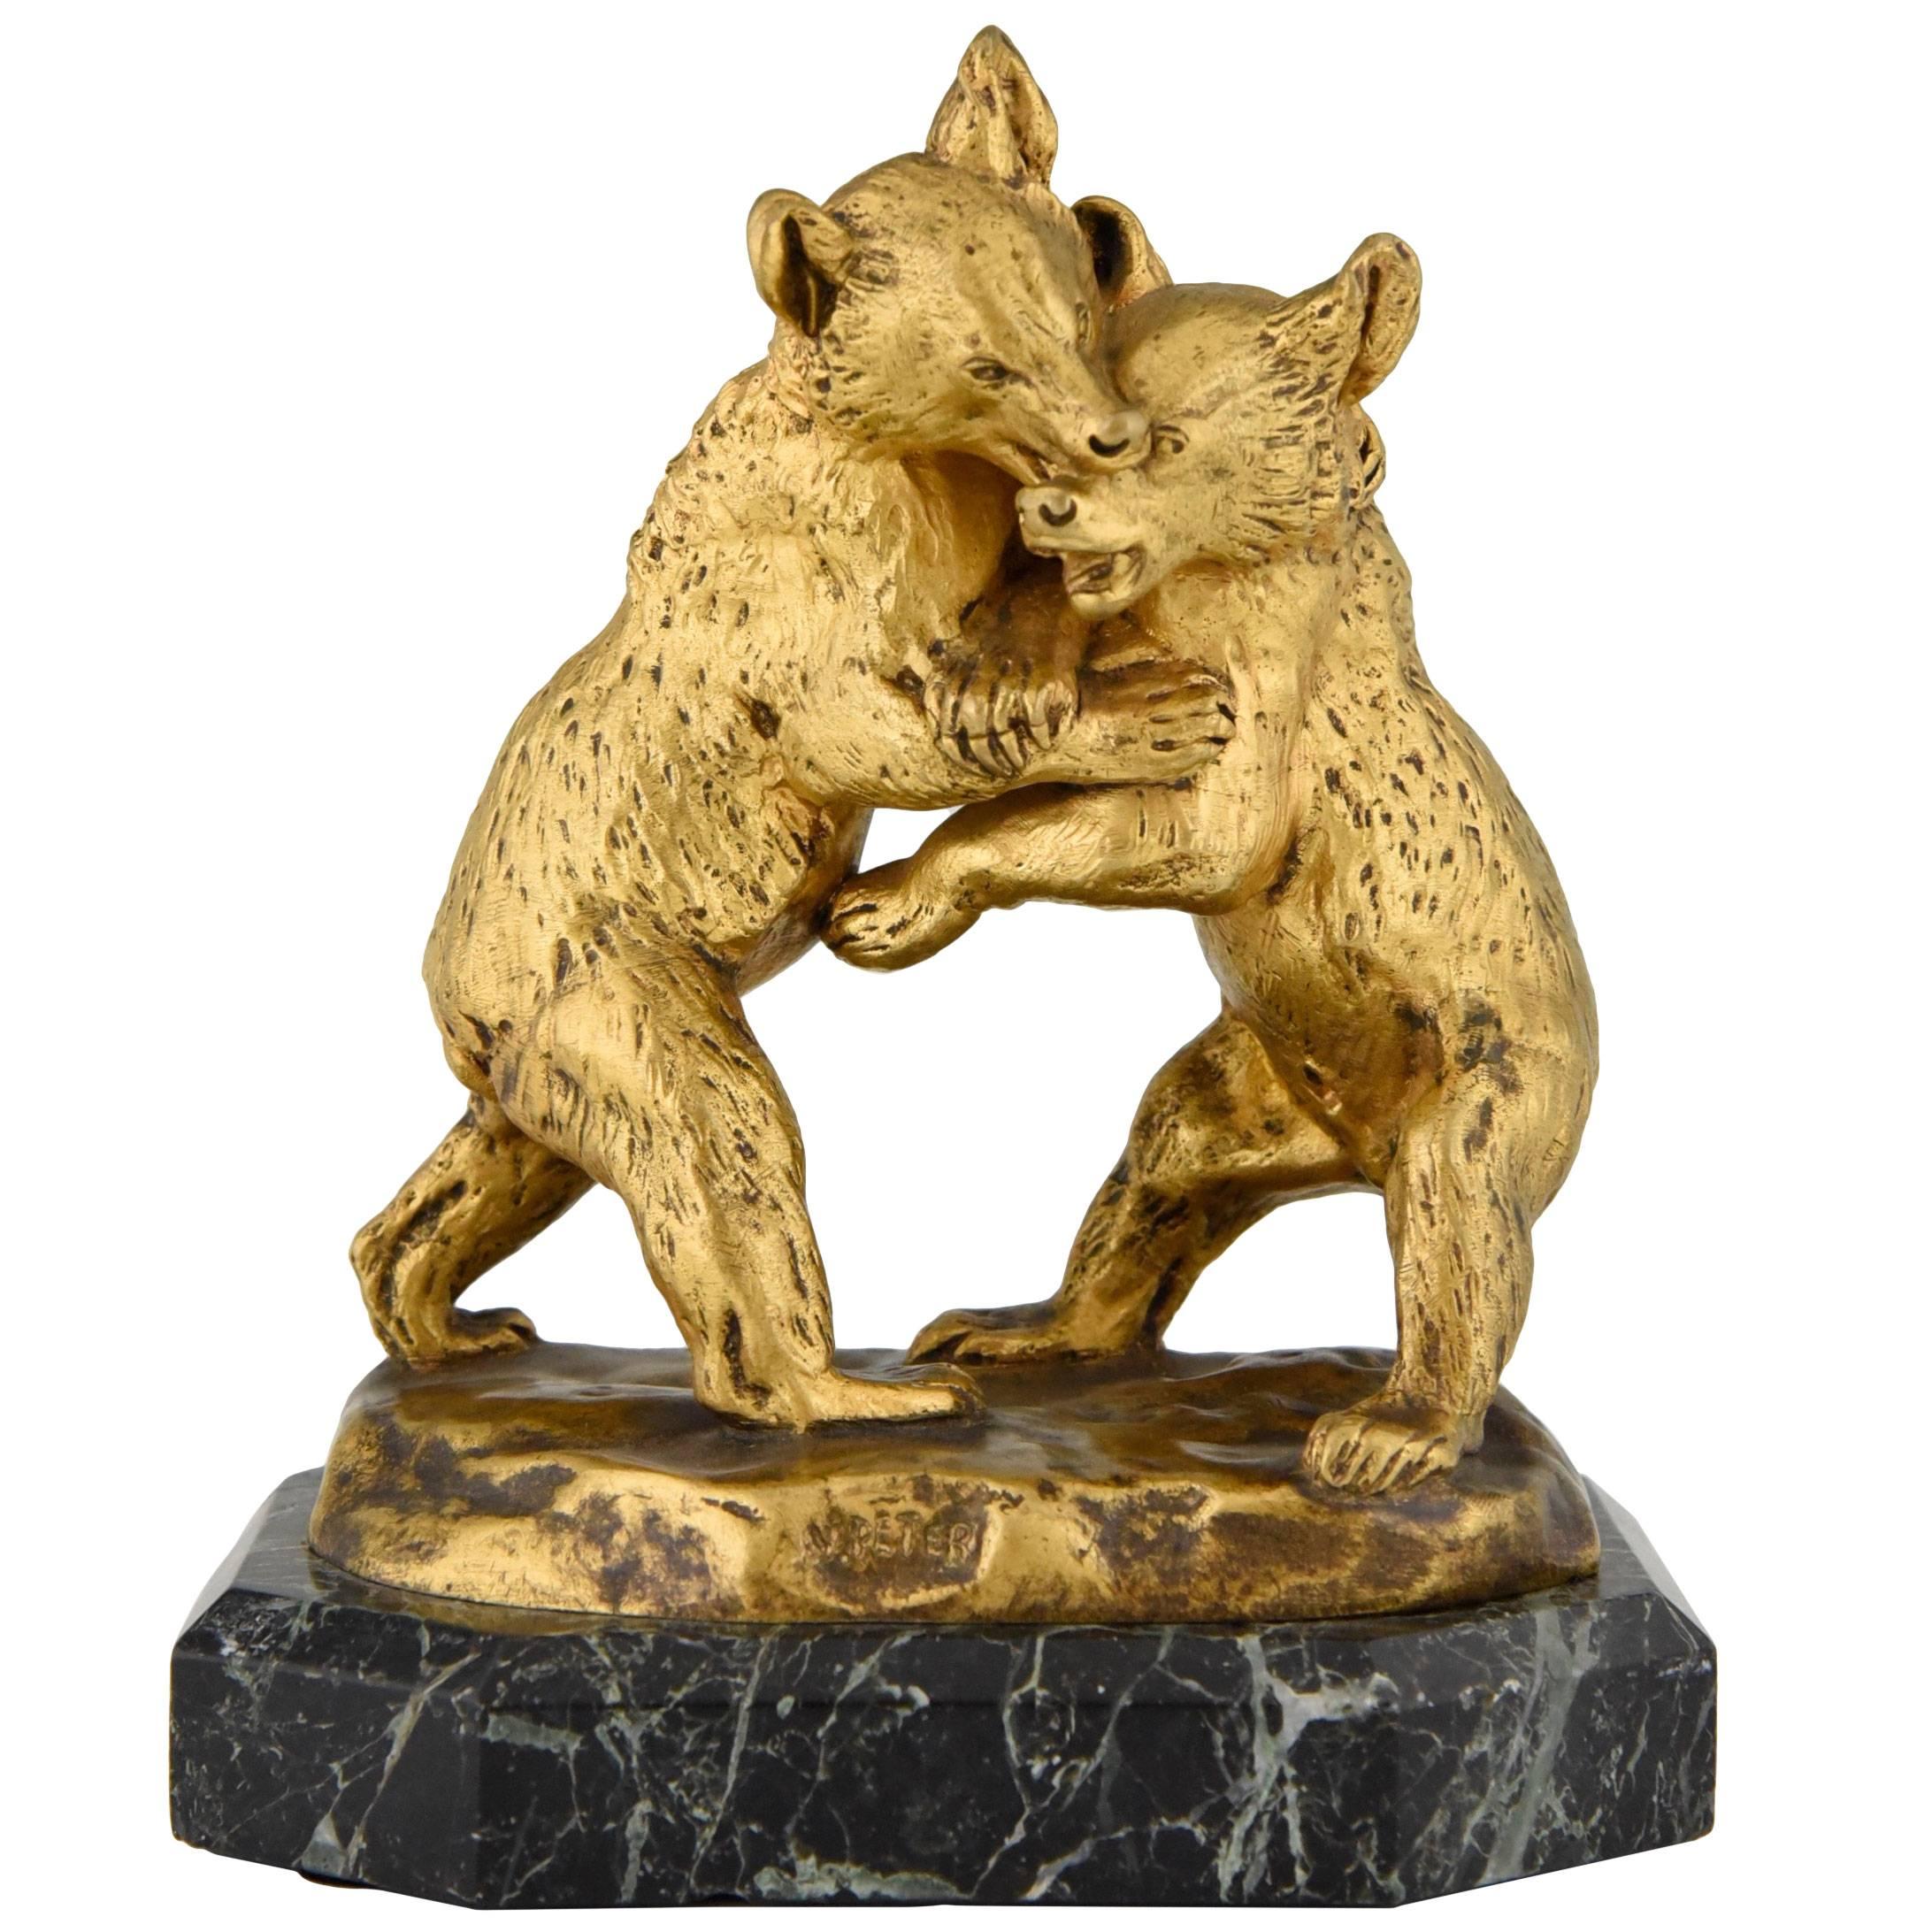 Antique Bronze sculpture of Two Young Bears Playing by Victor Peter